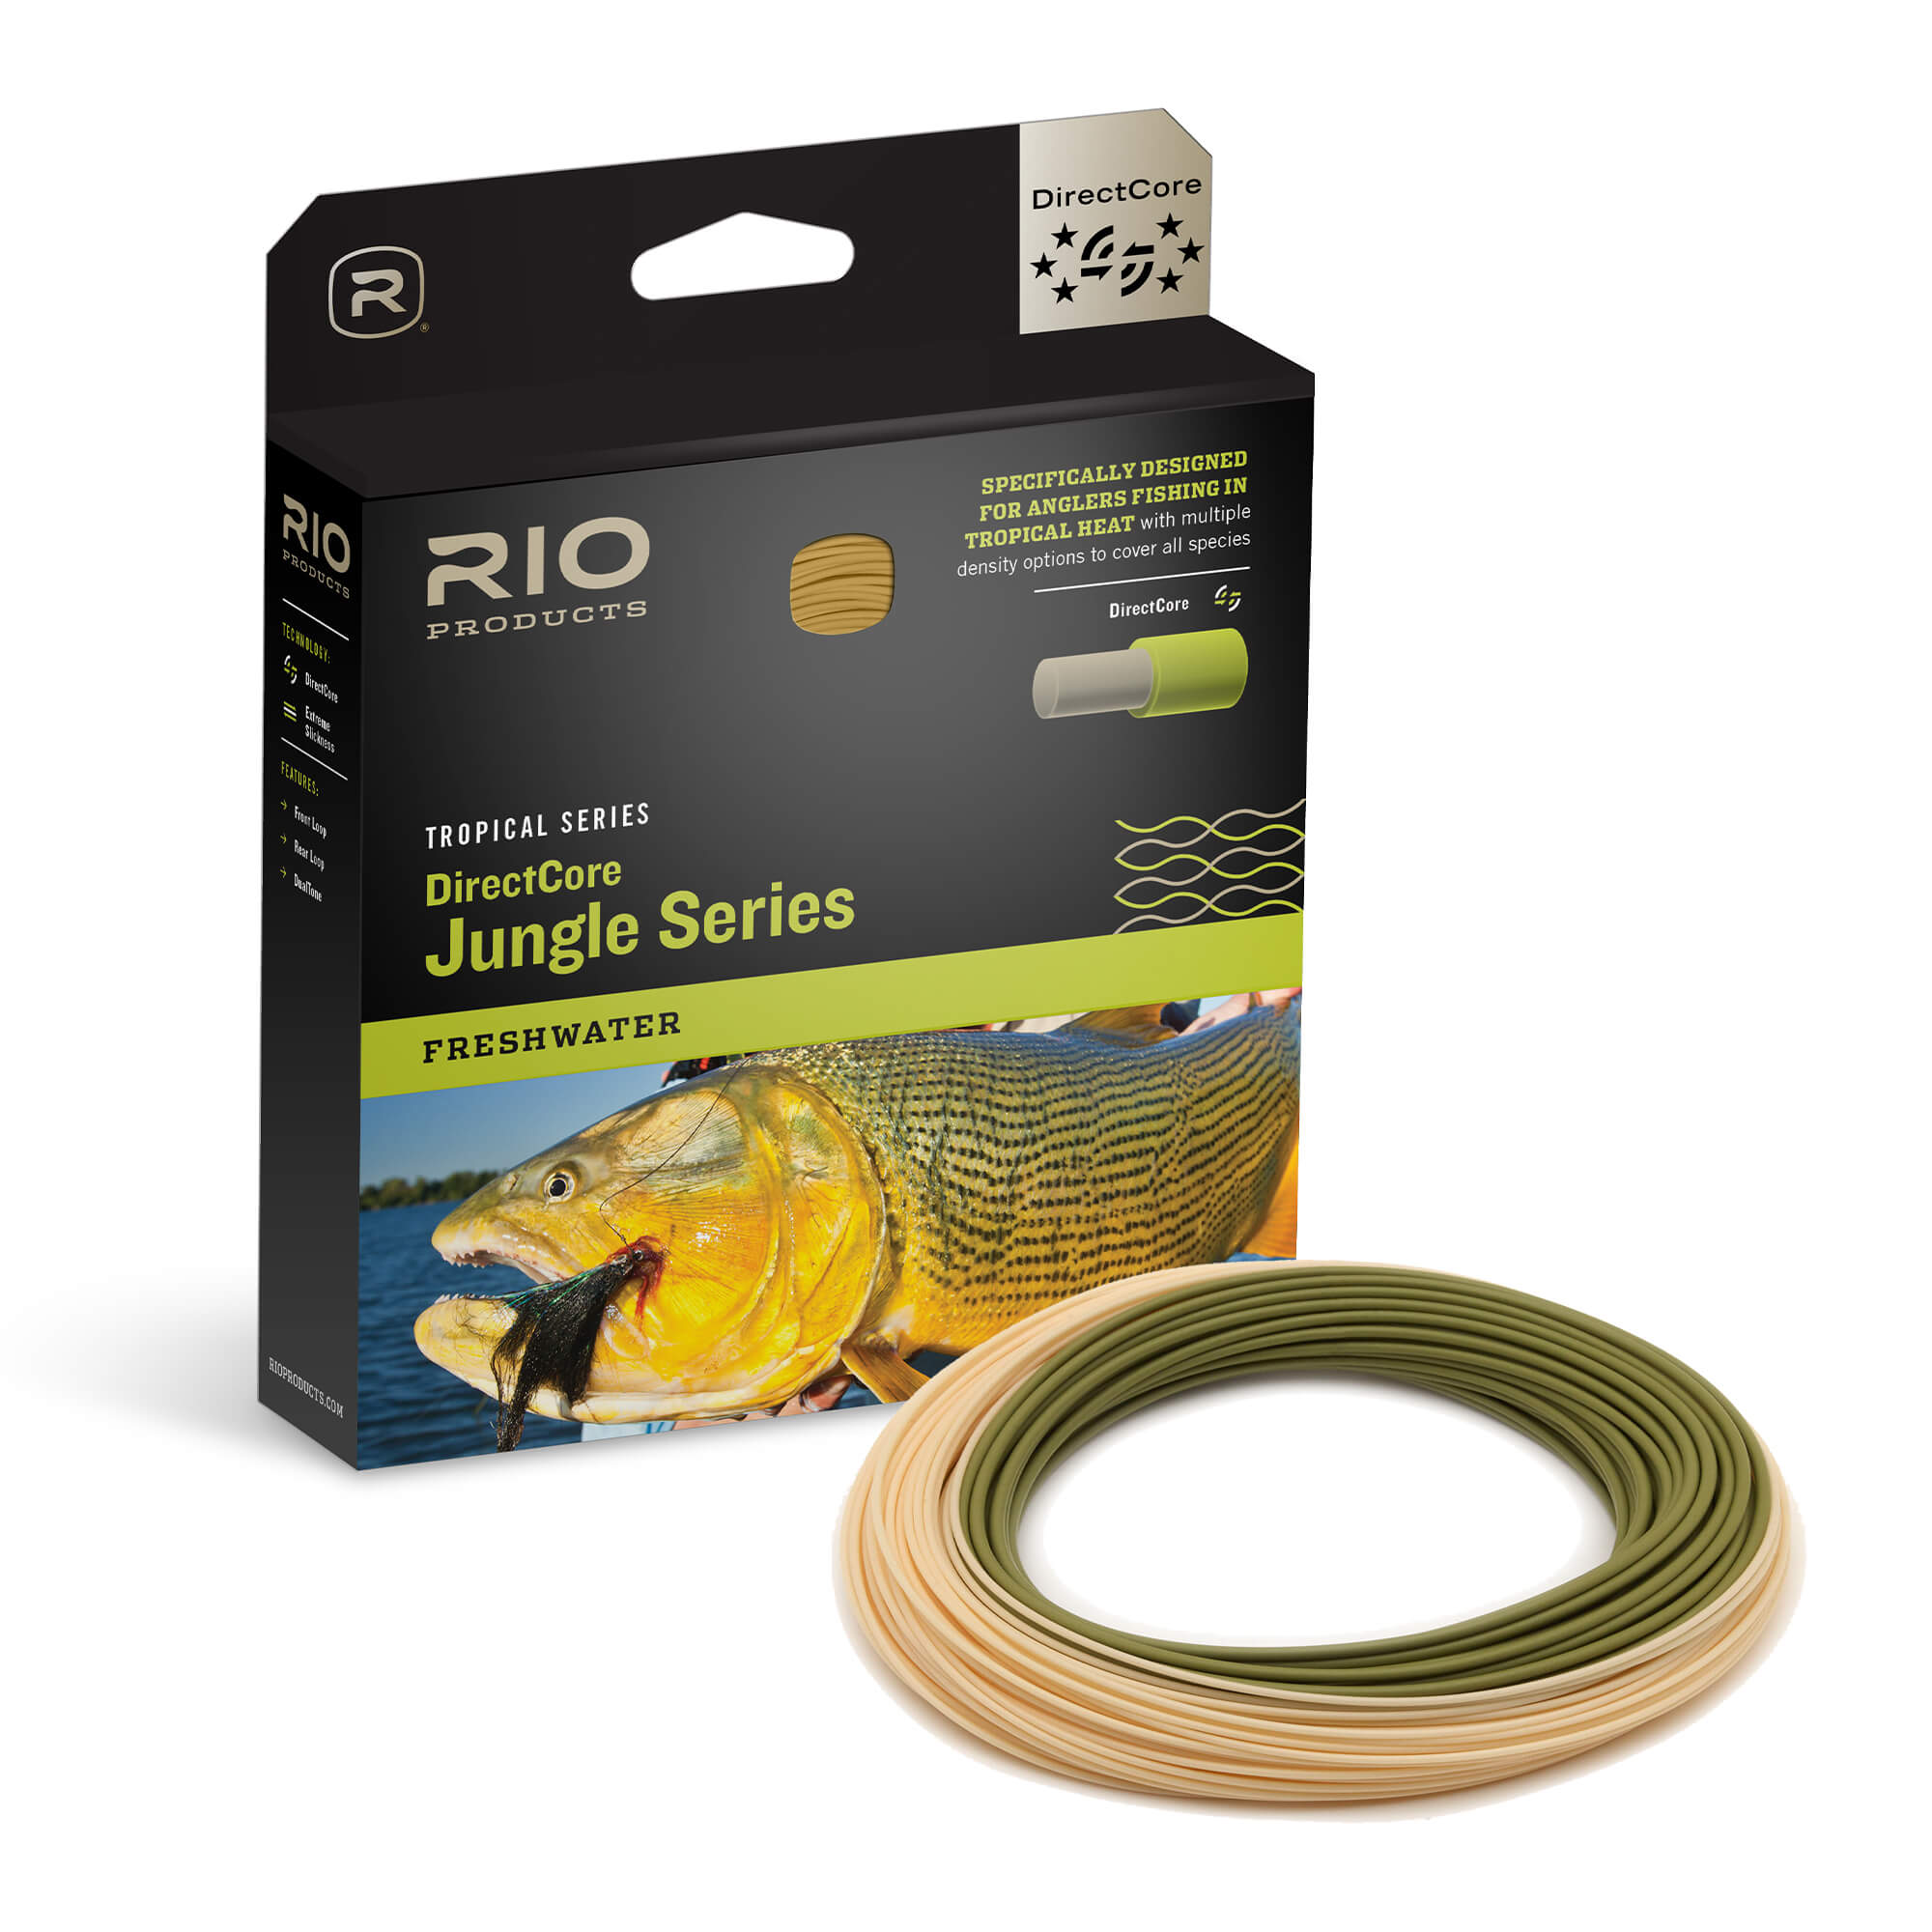 RIO Directcore Jungle Fly Line – Guide Flyfishing, Fly Fishing Rods, Reels, Sage, Redington, RIO